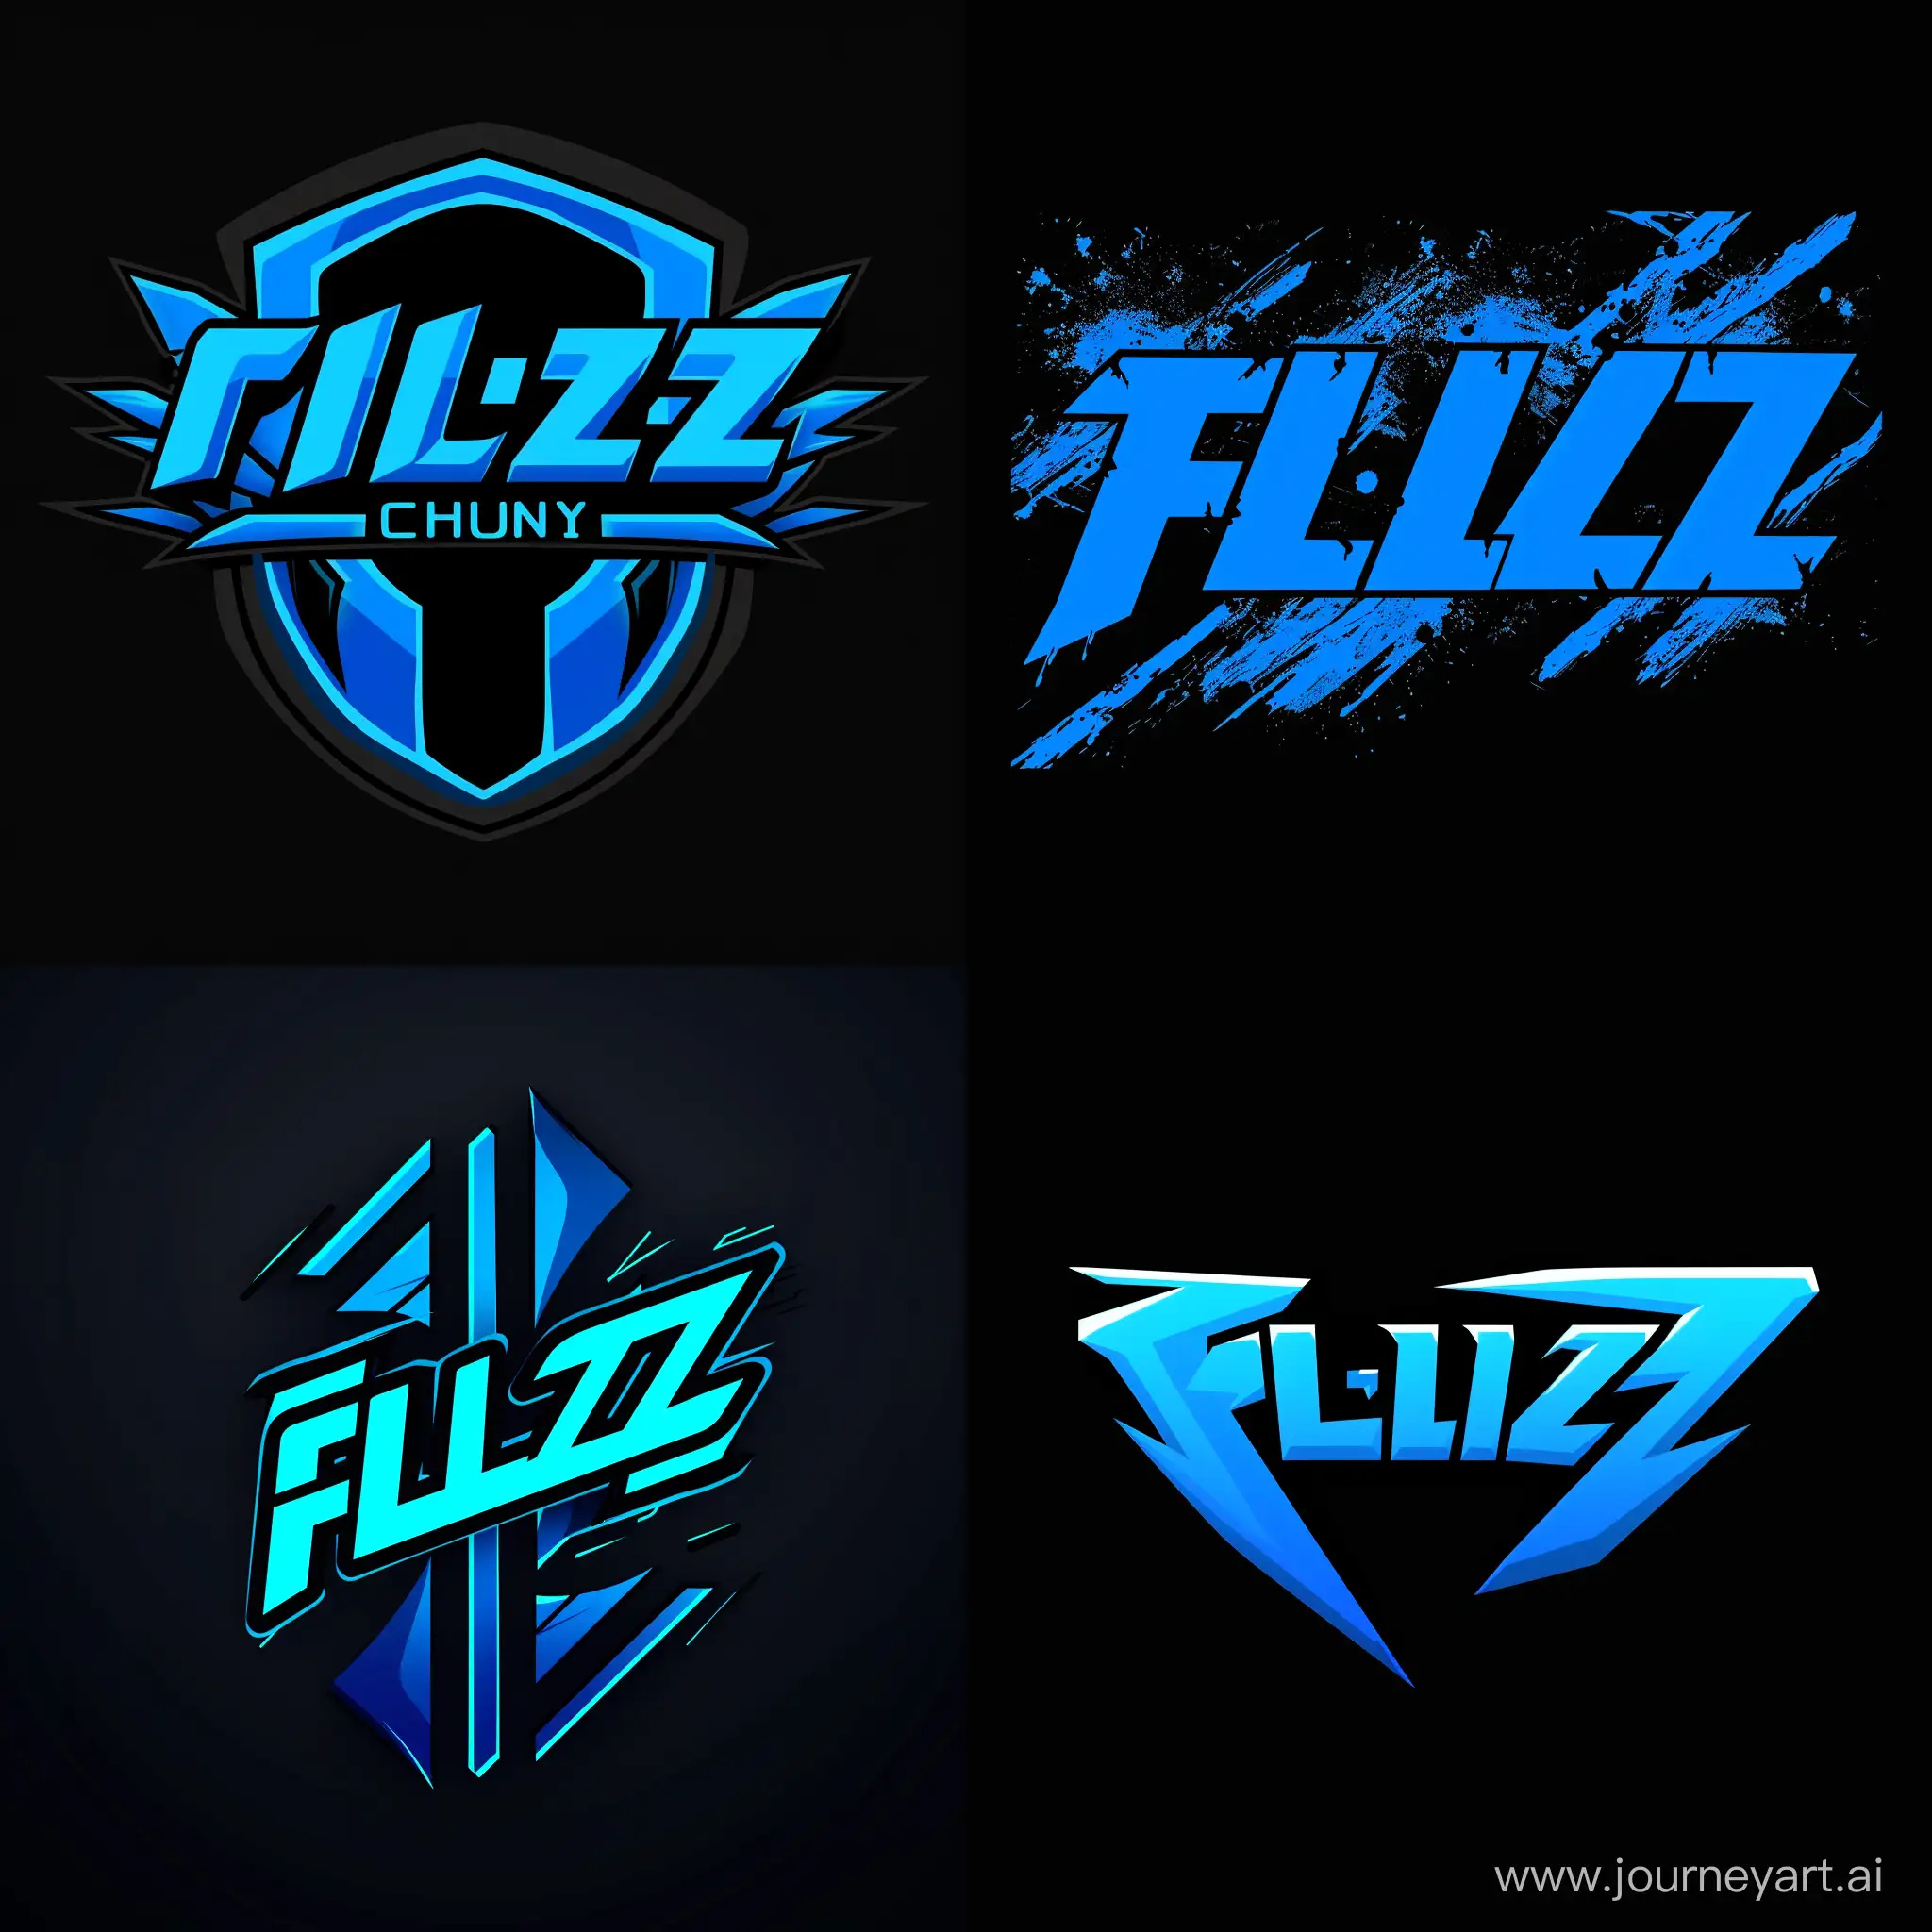 Stylish-Blue-and-Black-Logo-for-Fl1zy-Channel